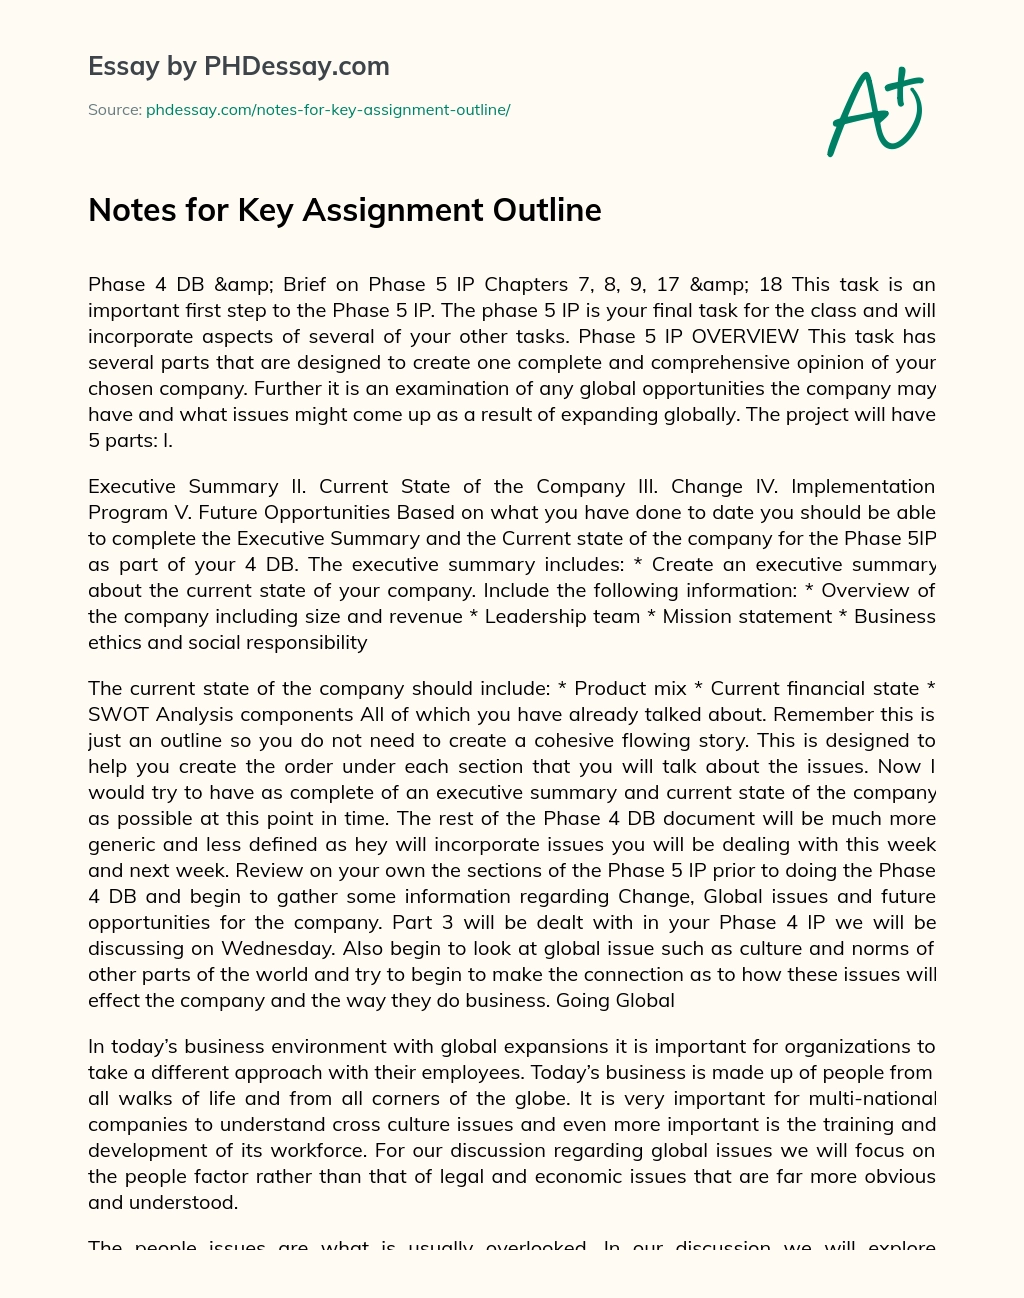 Notes for Key Assignment Outline essay